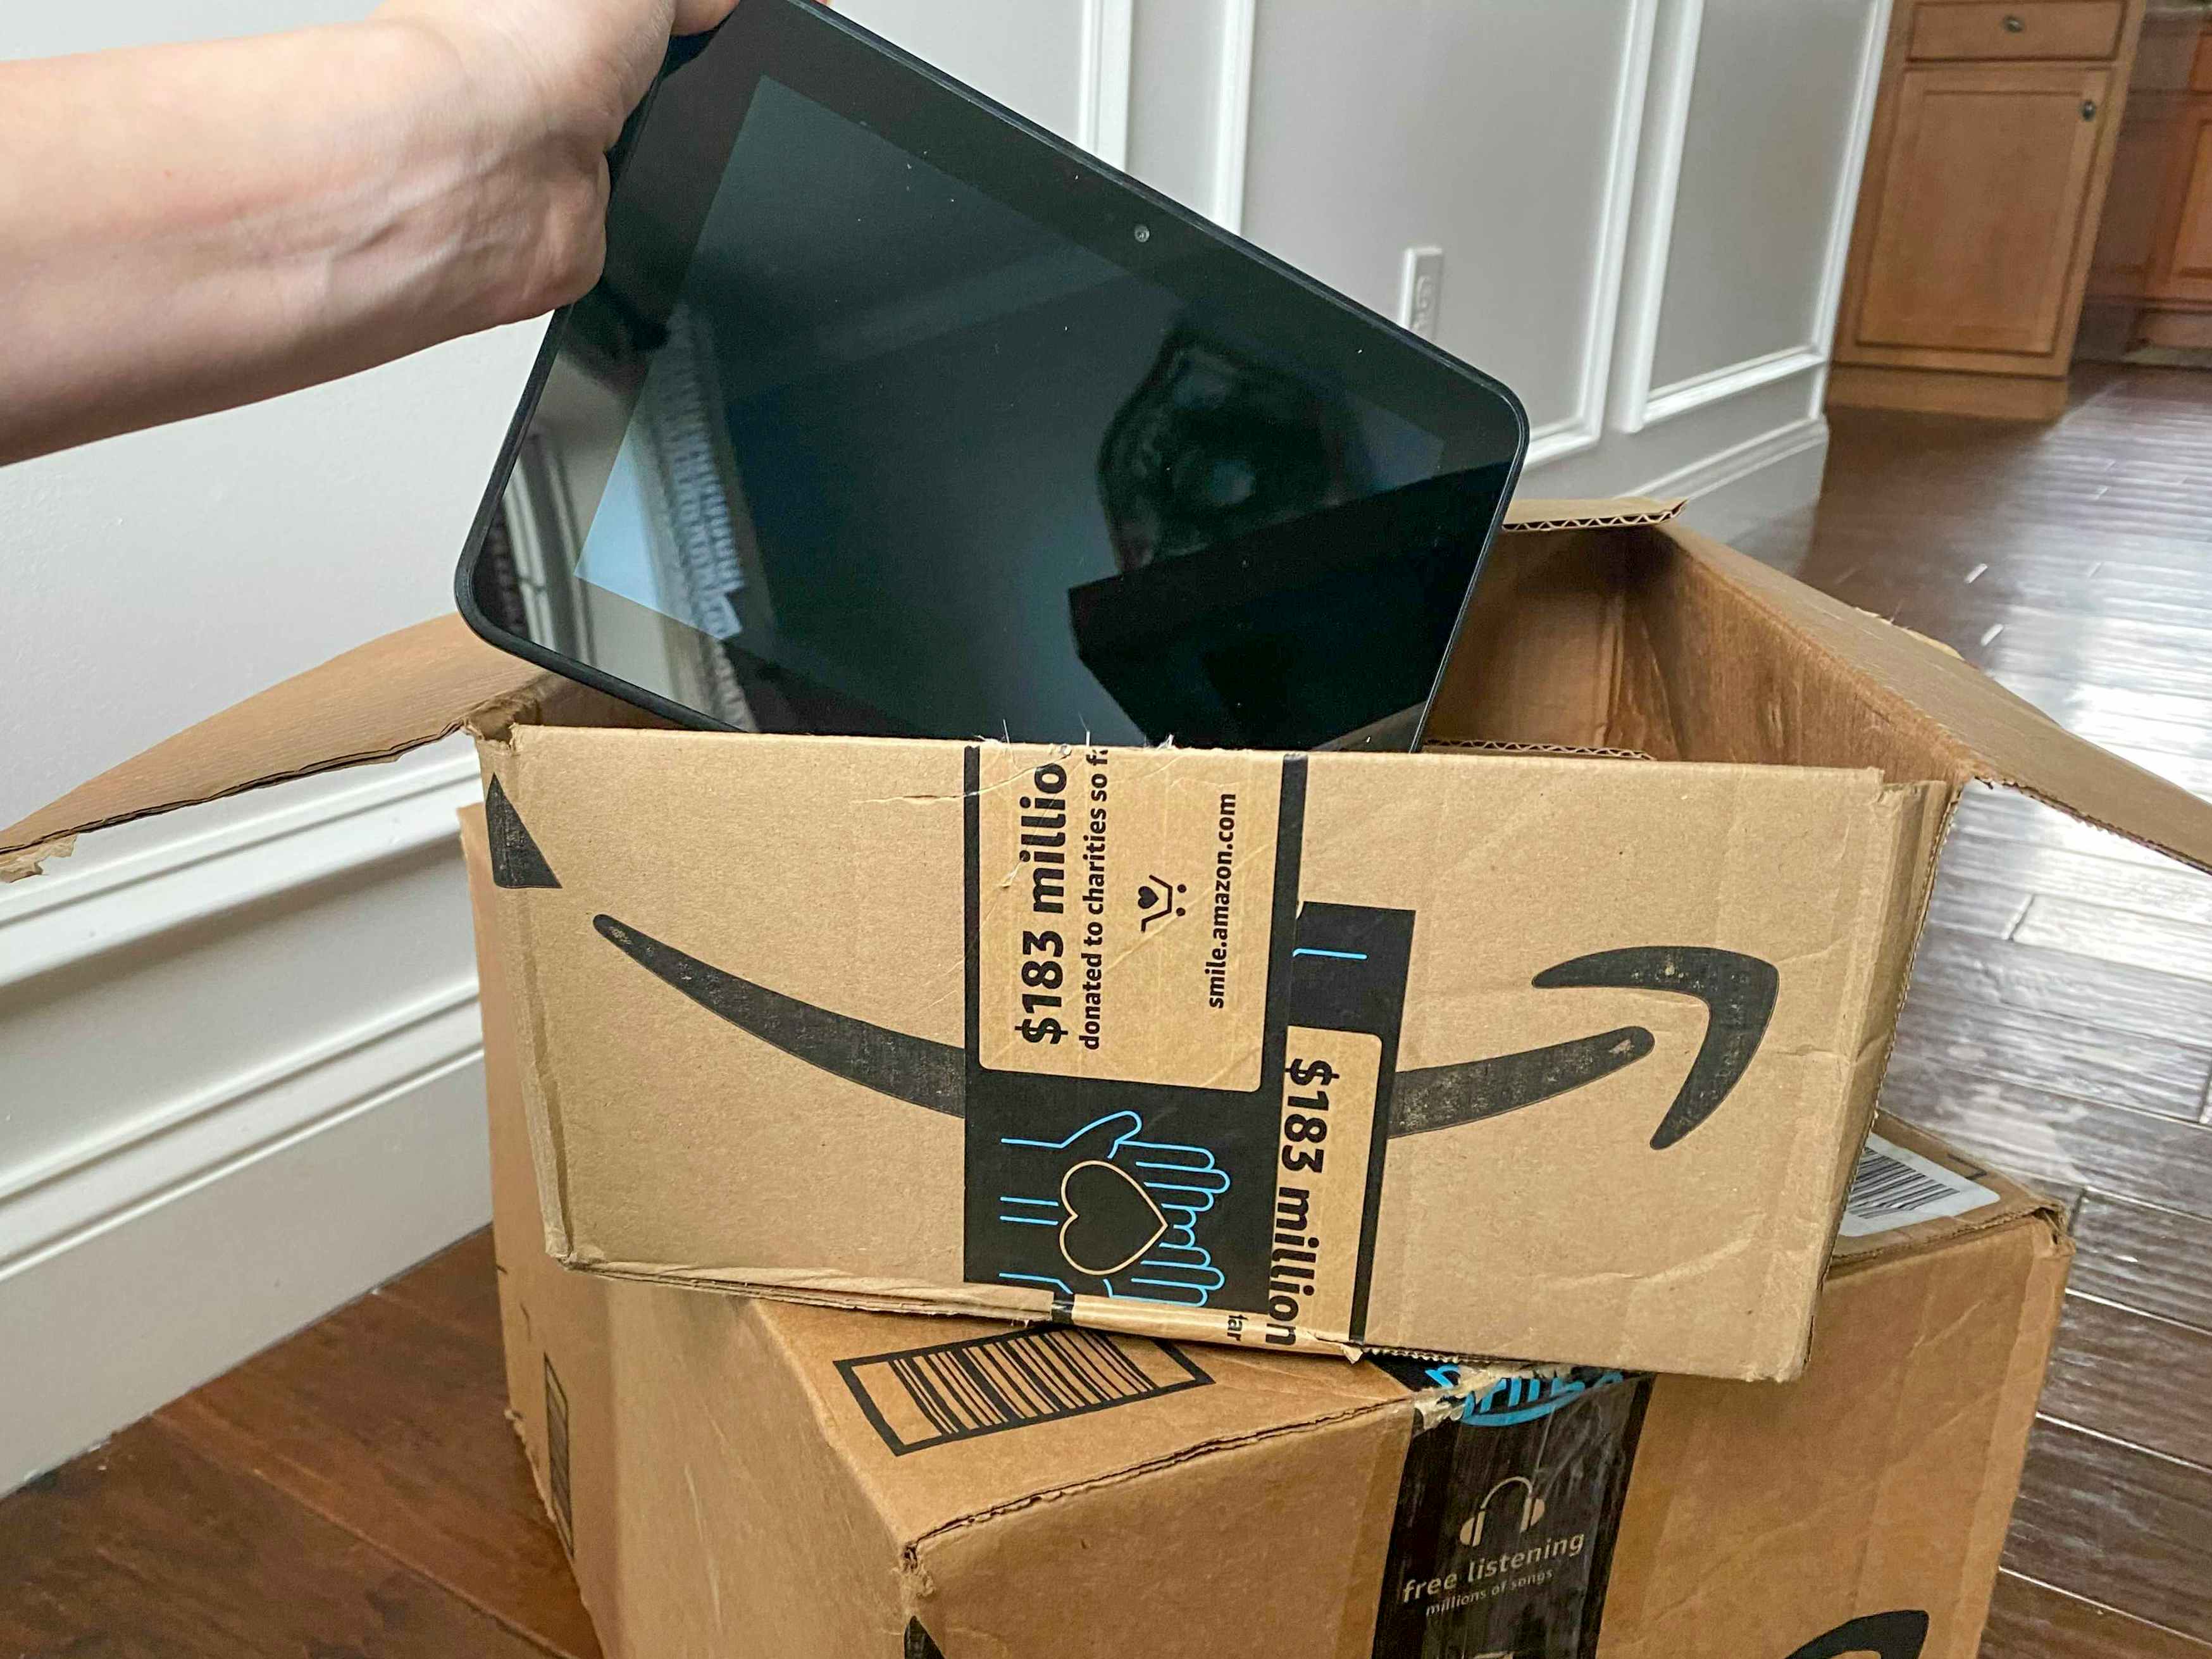 An Amazon fire tablet being put into an Amazon box.